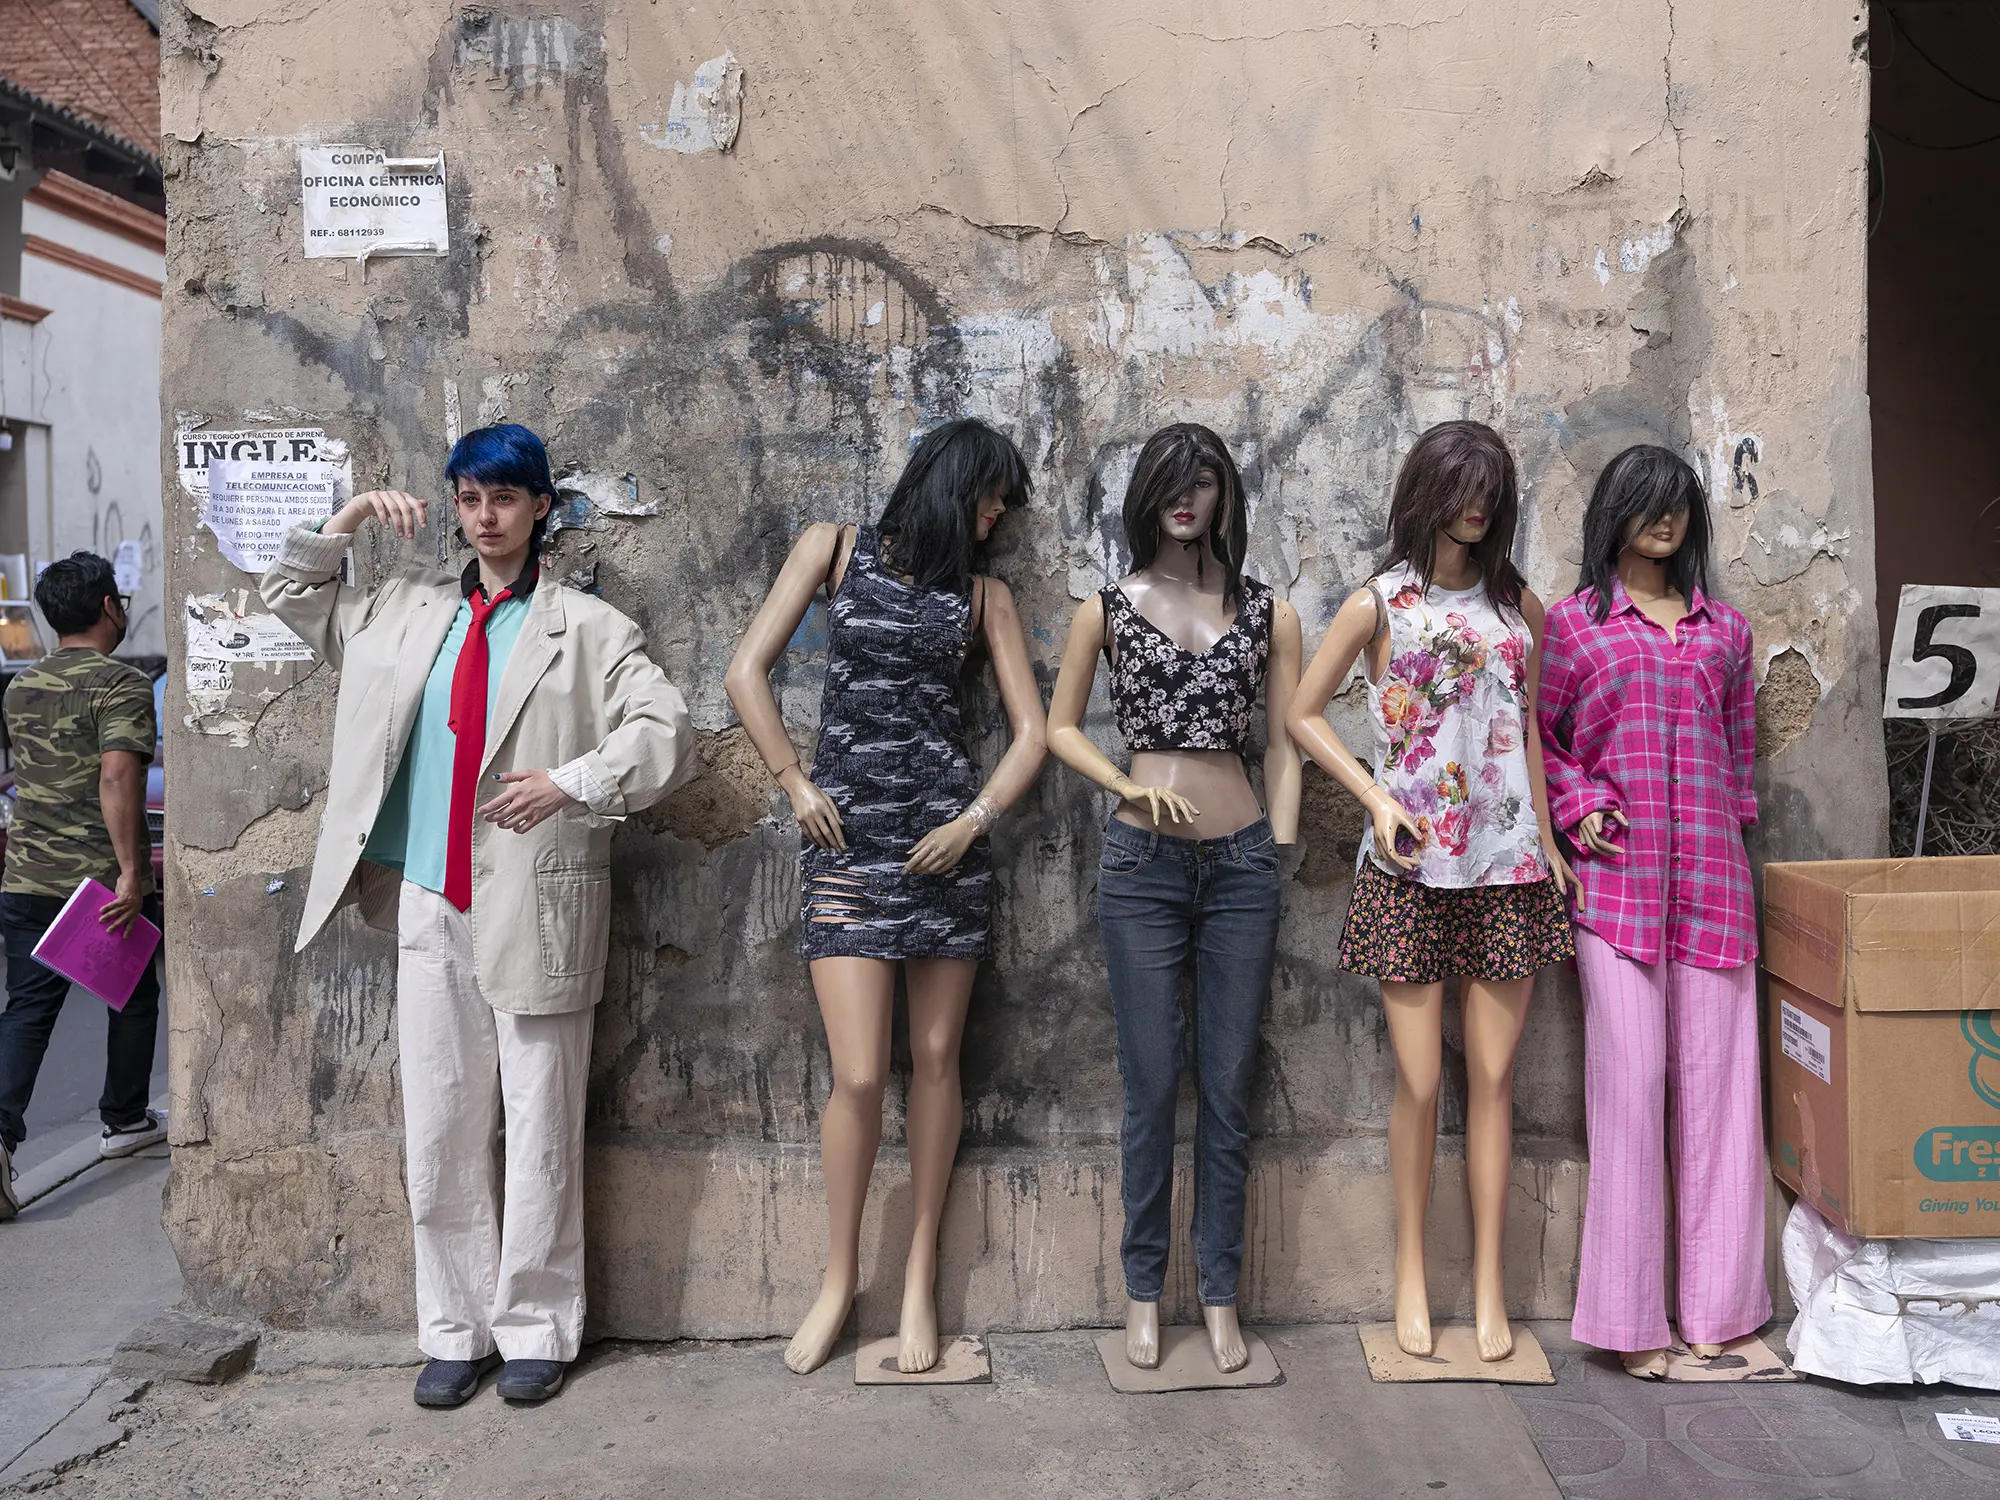 A young person poses next to mannequins on the street